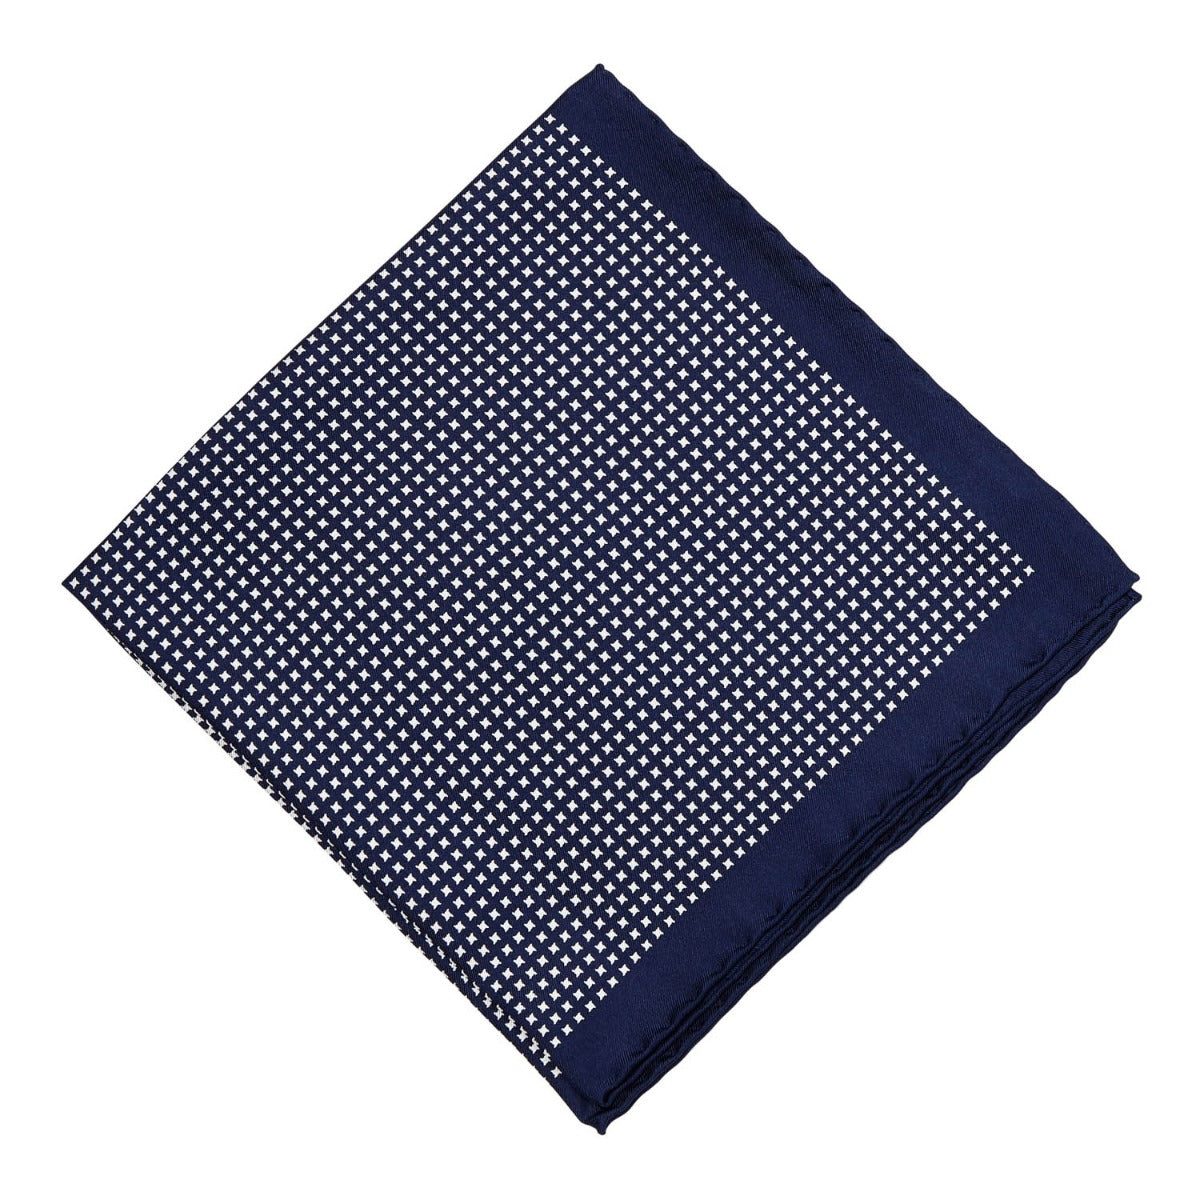 A Sovereign Grade 100% Silk Navy Repeating White Star pocket square by KirbyAllison.com.